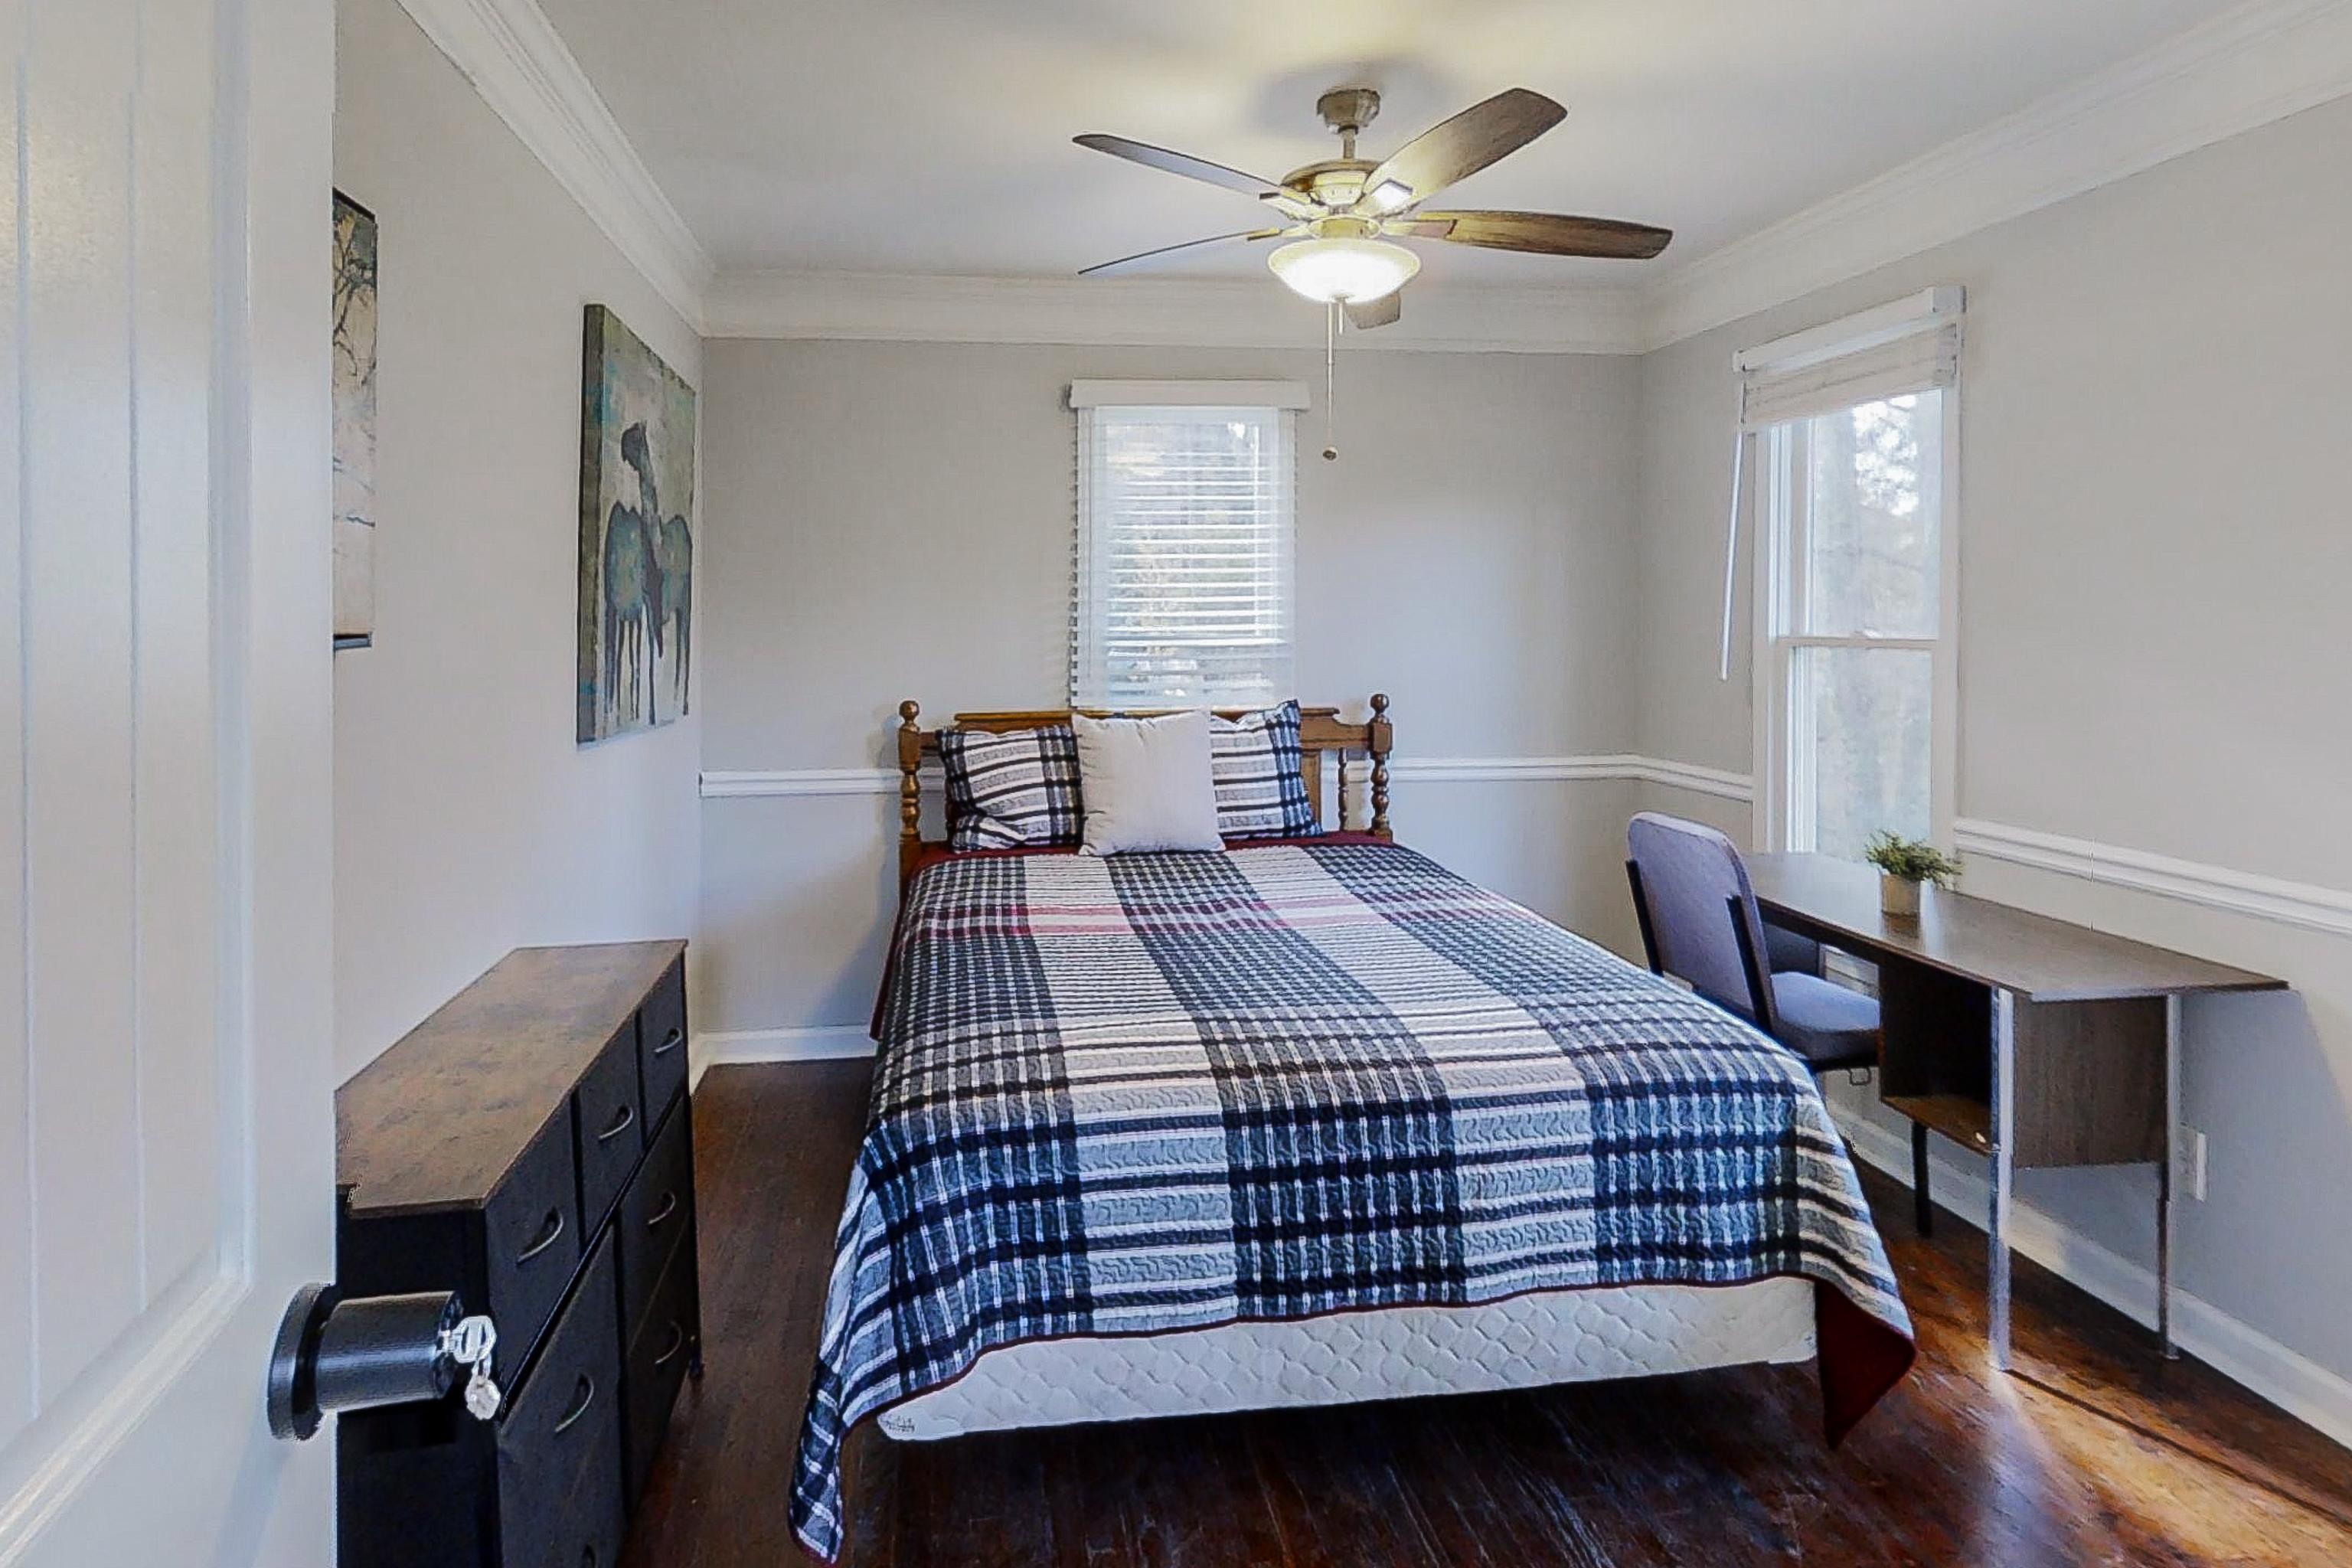 Rooms for Rent in Atlanta: Cheap Furnished Rooms to Rent Atlanta